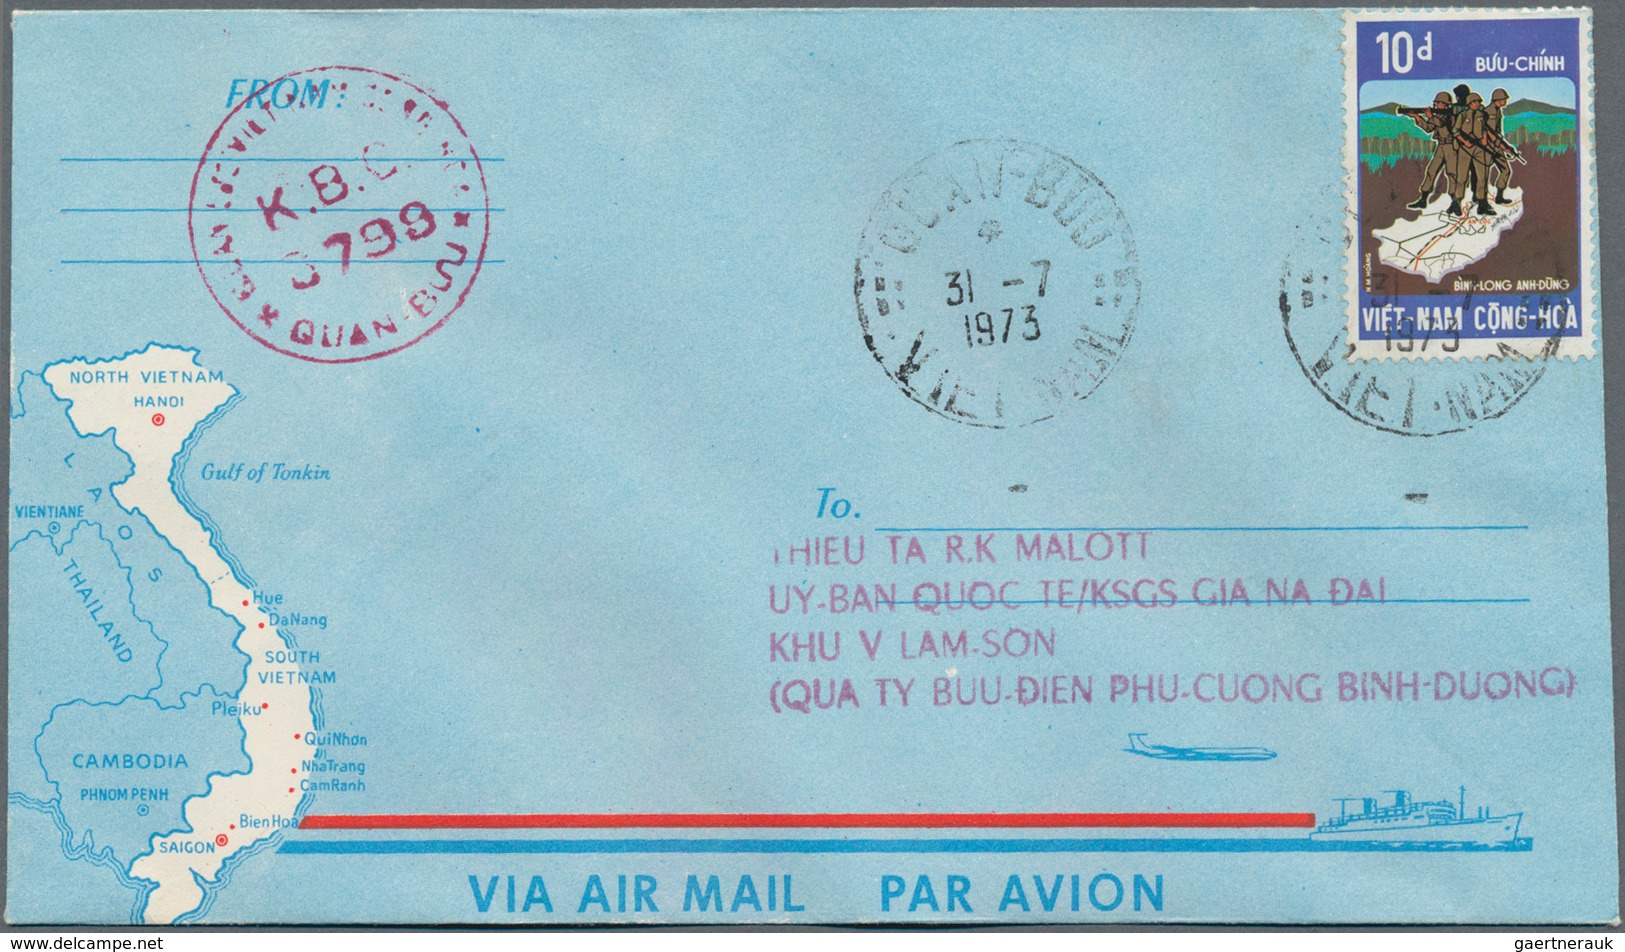 Vietnam: 1952/96, 32 covers and 6 labels of South Vietnam, as well as covers after unification, some